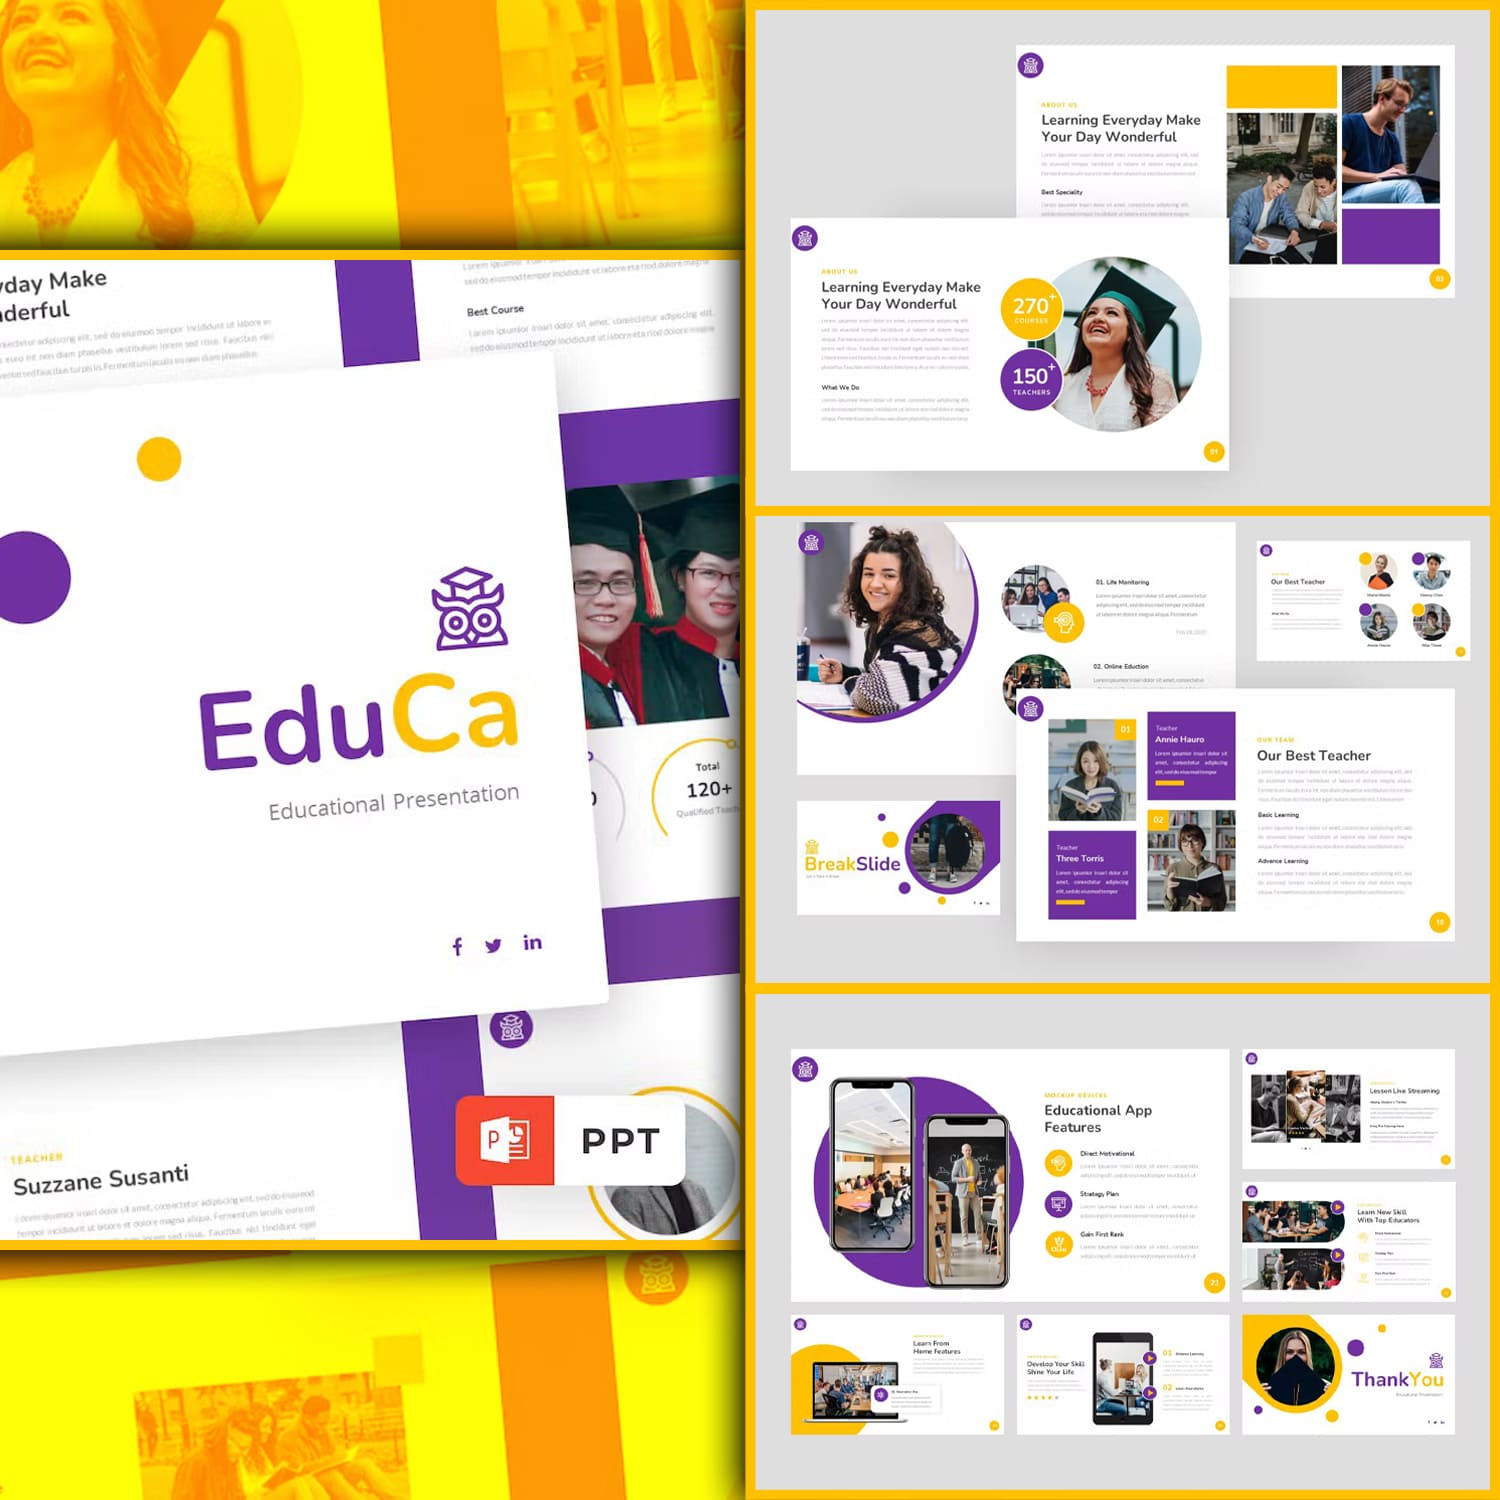 Second picture 1500x1500, Education university powerpoint template educa.